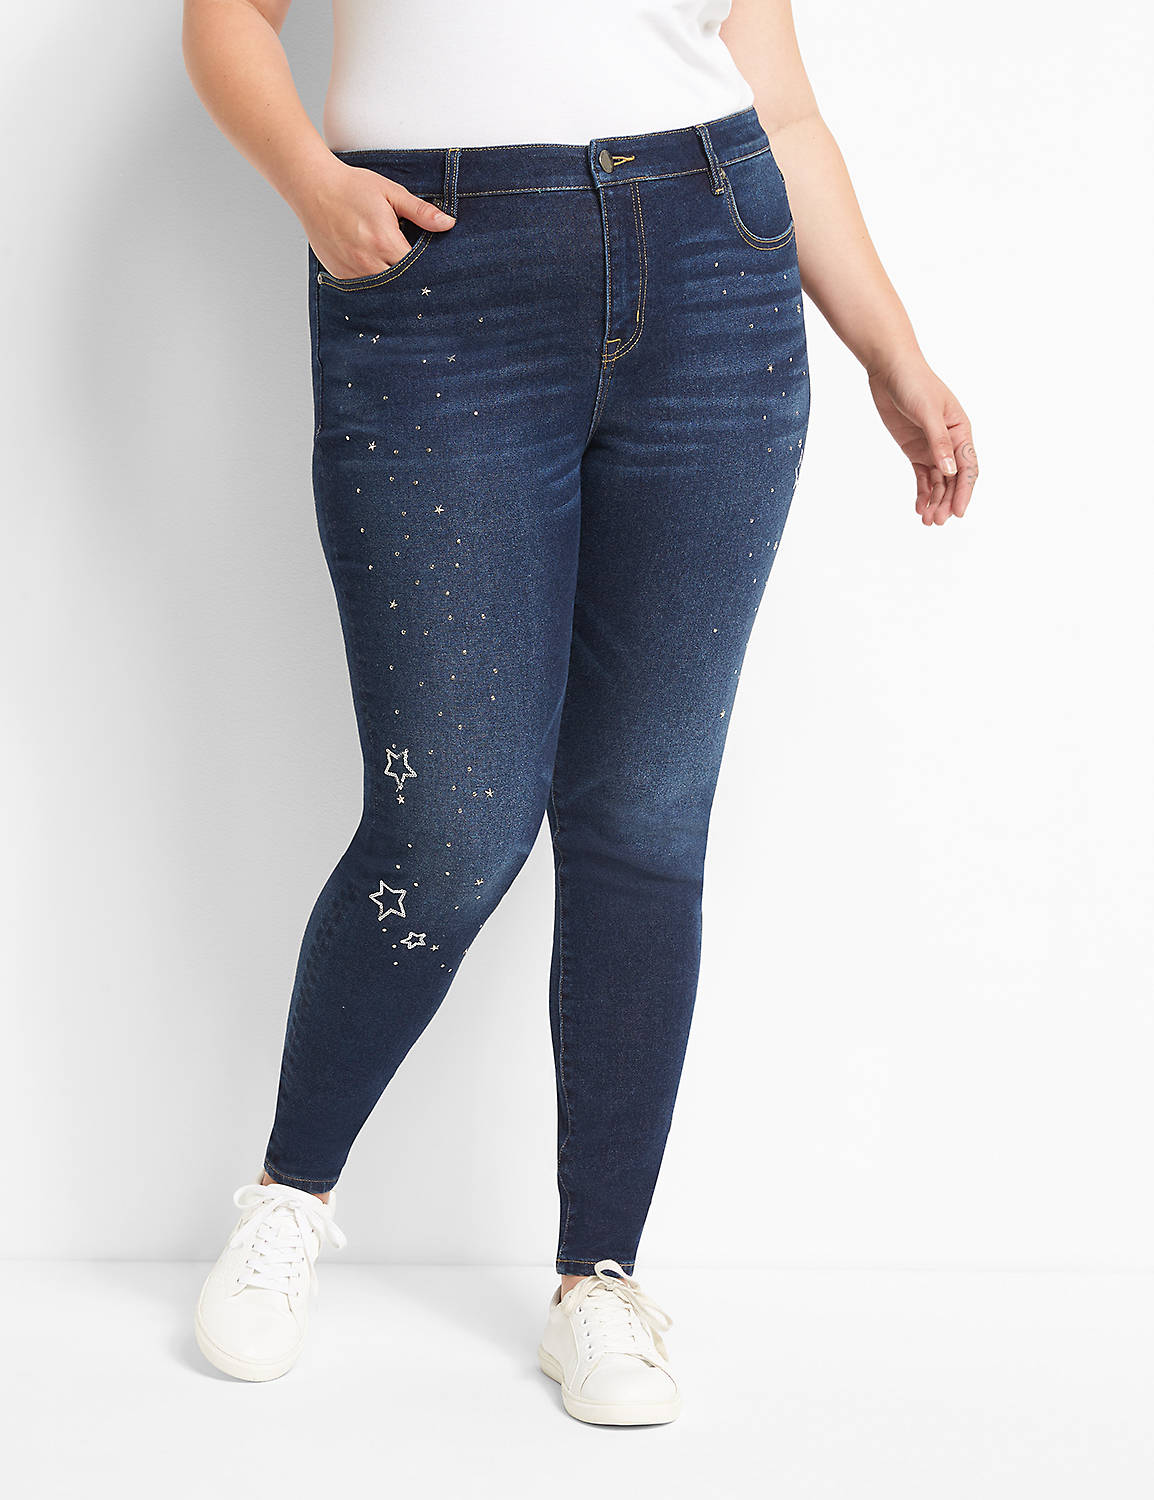 Signature Fit High-Rise Skinny Jeans - Dark Wash Product Image 1